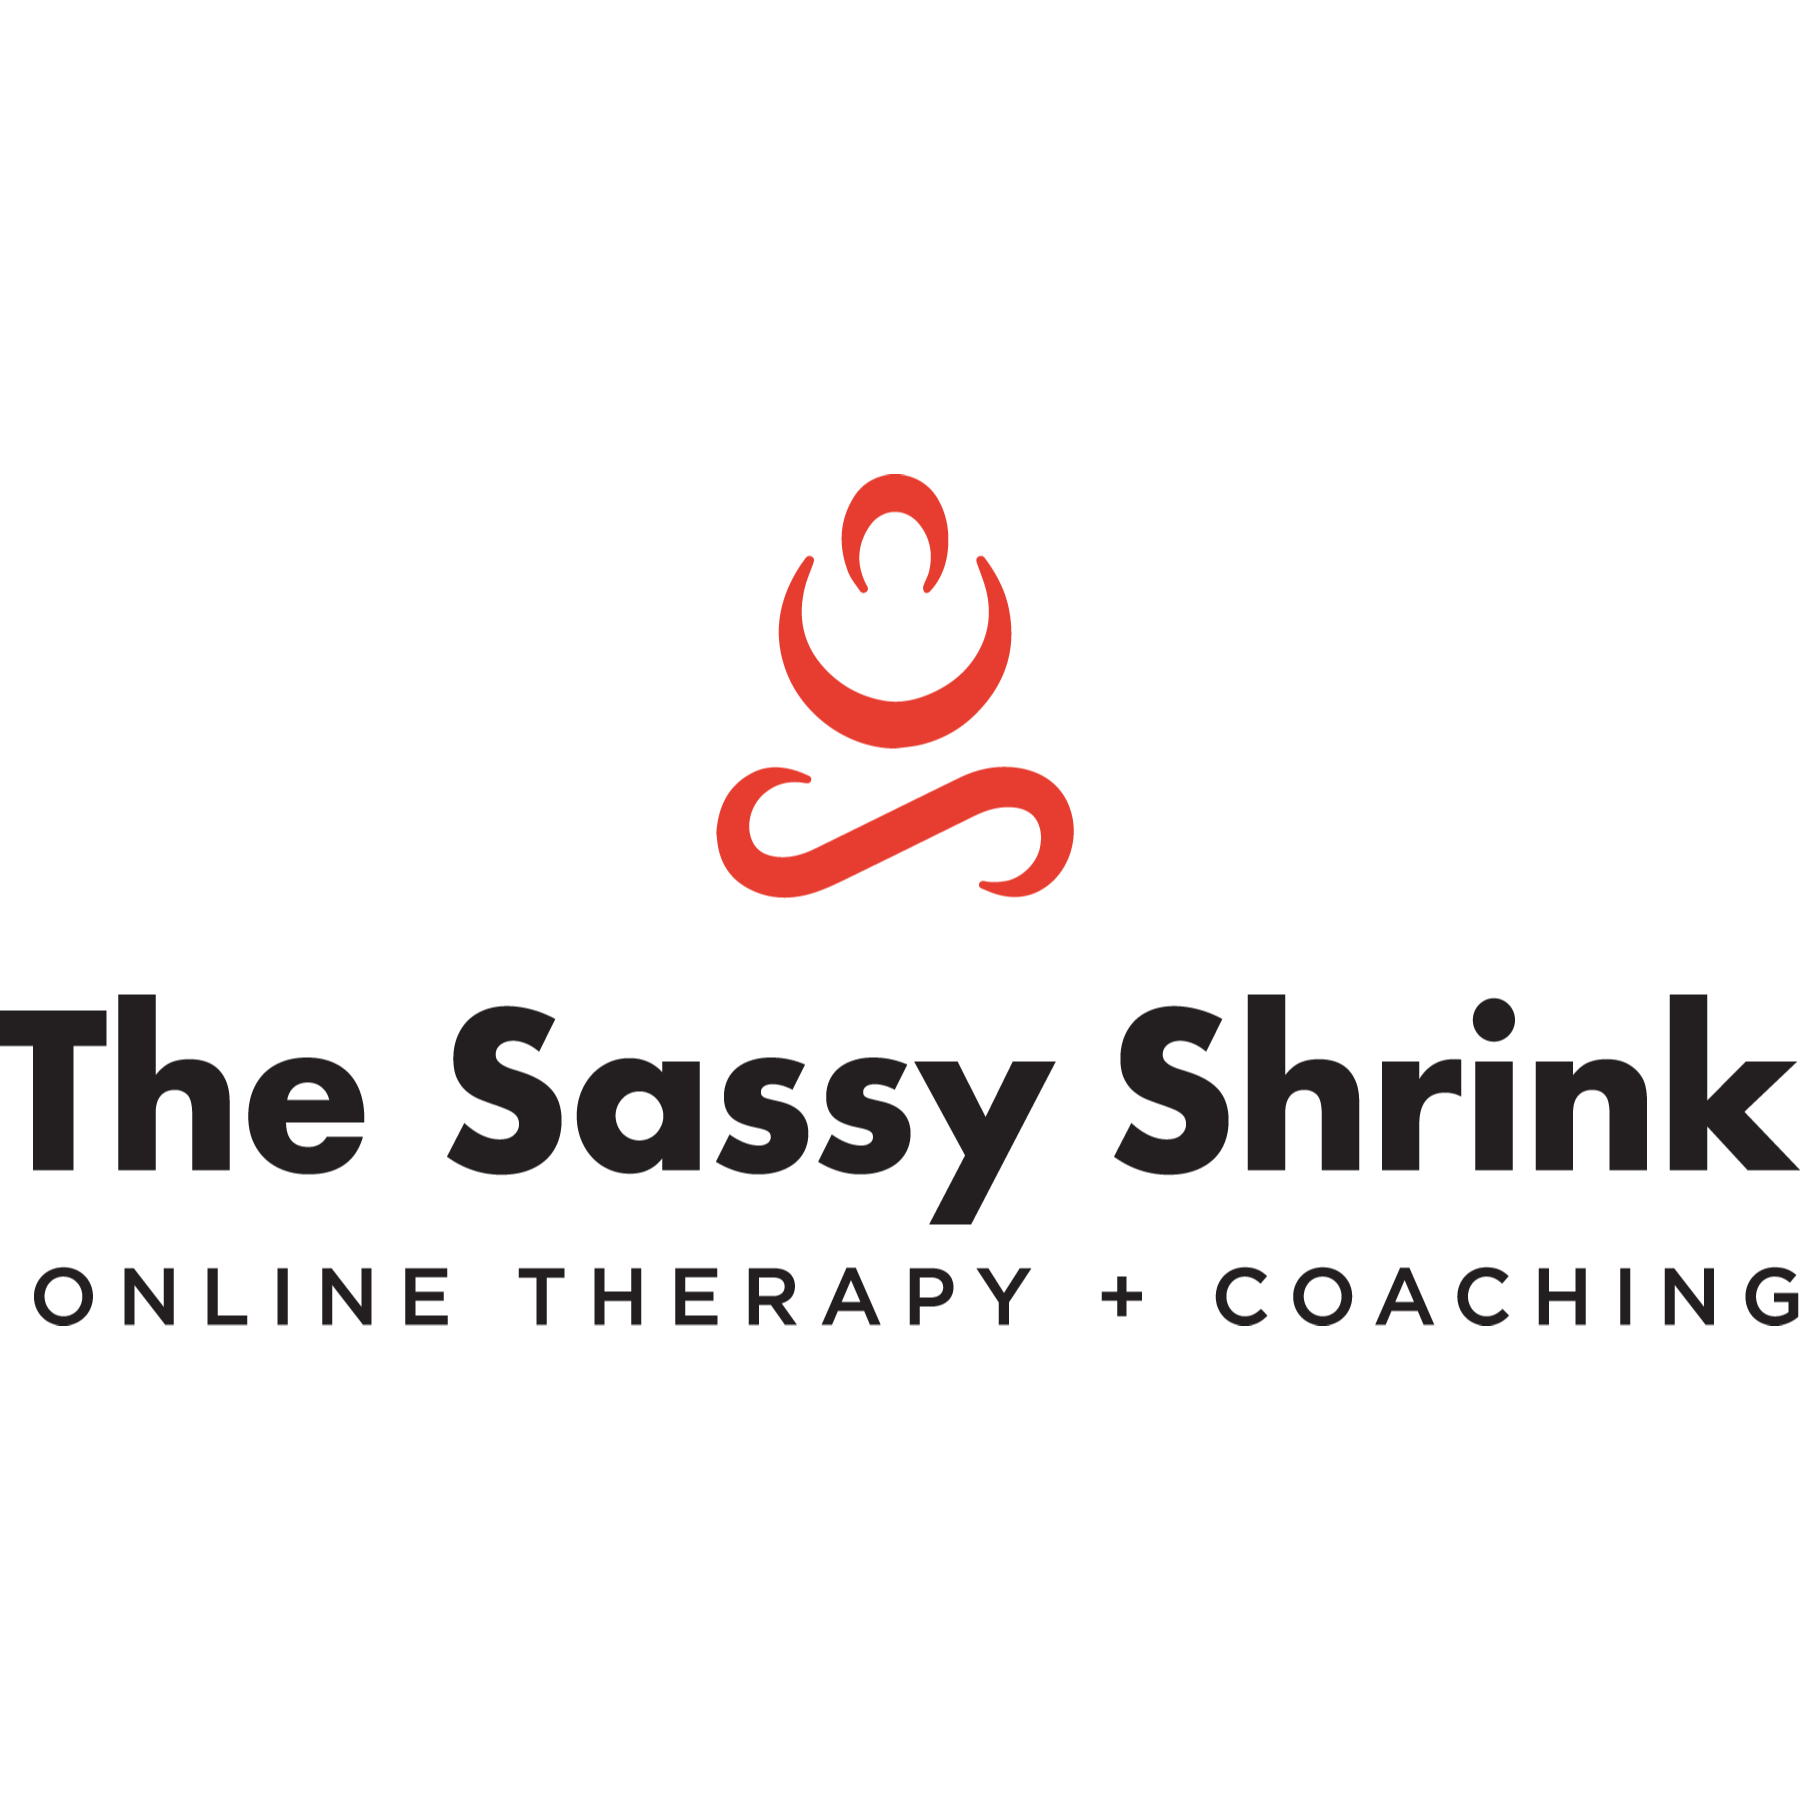 The Sassy Shrink - Online Therapy + Coaching